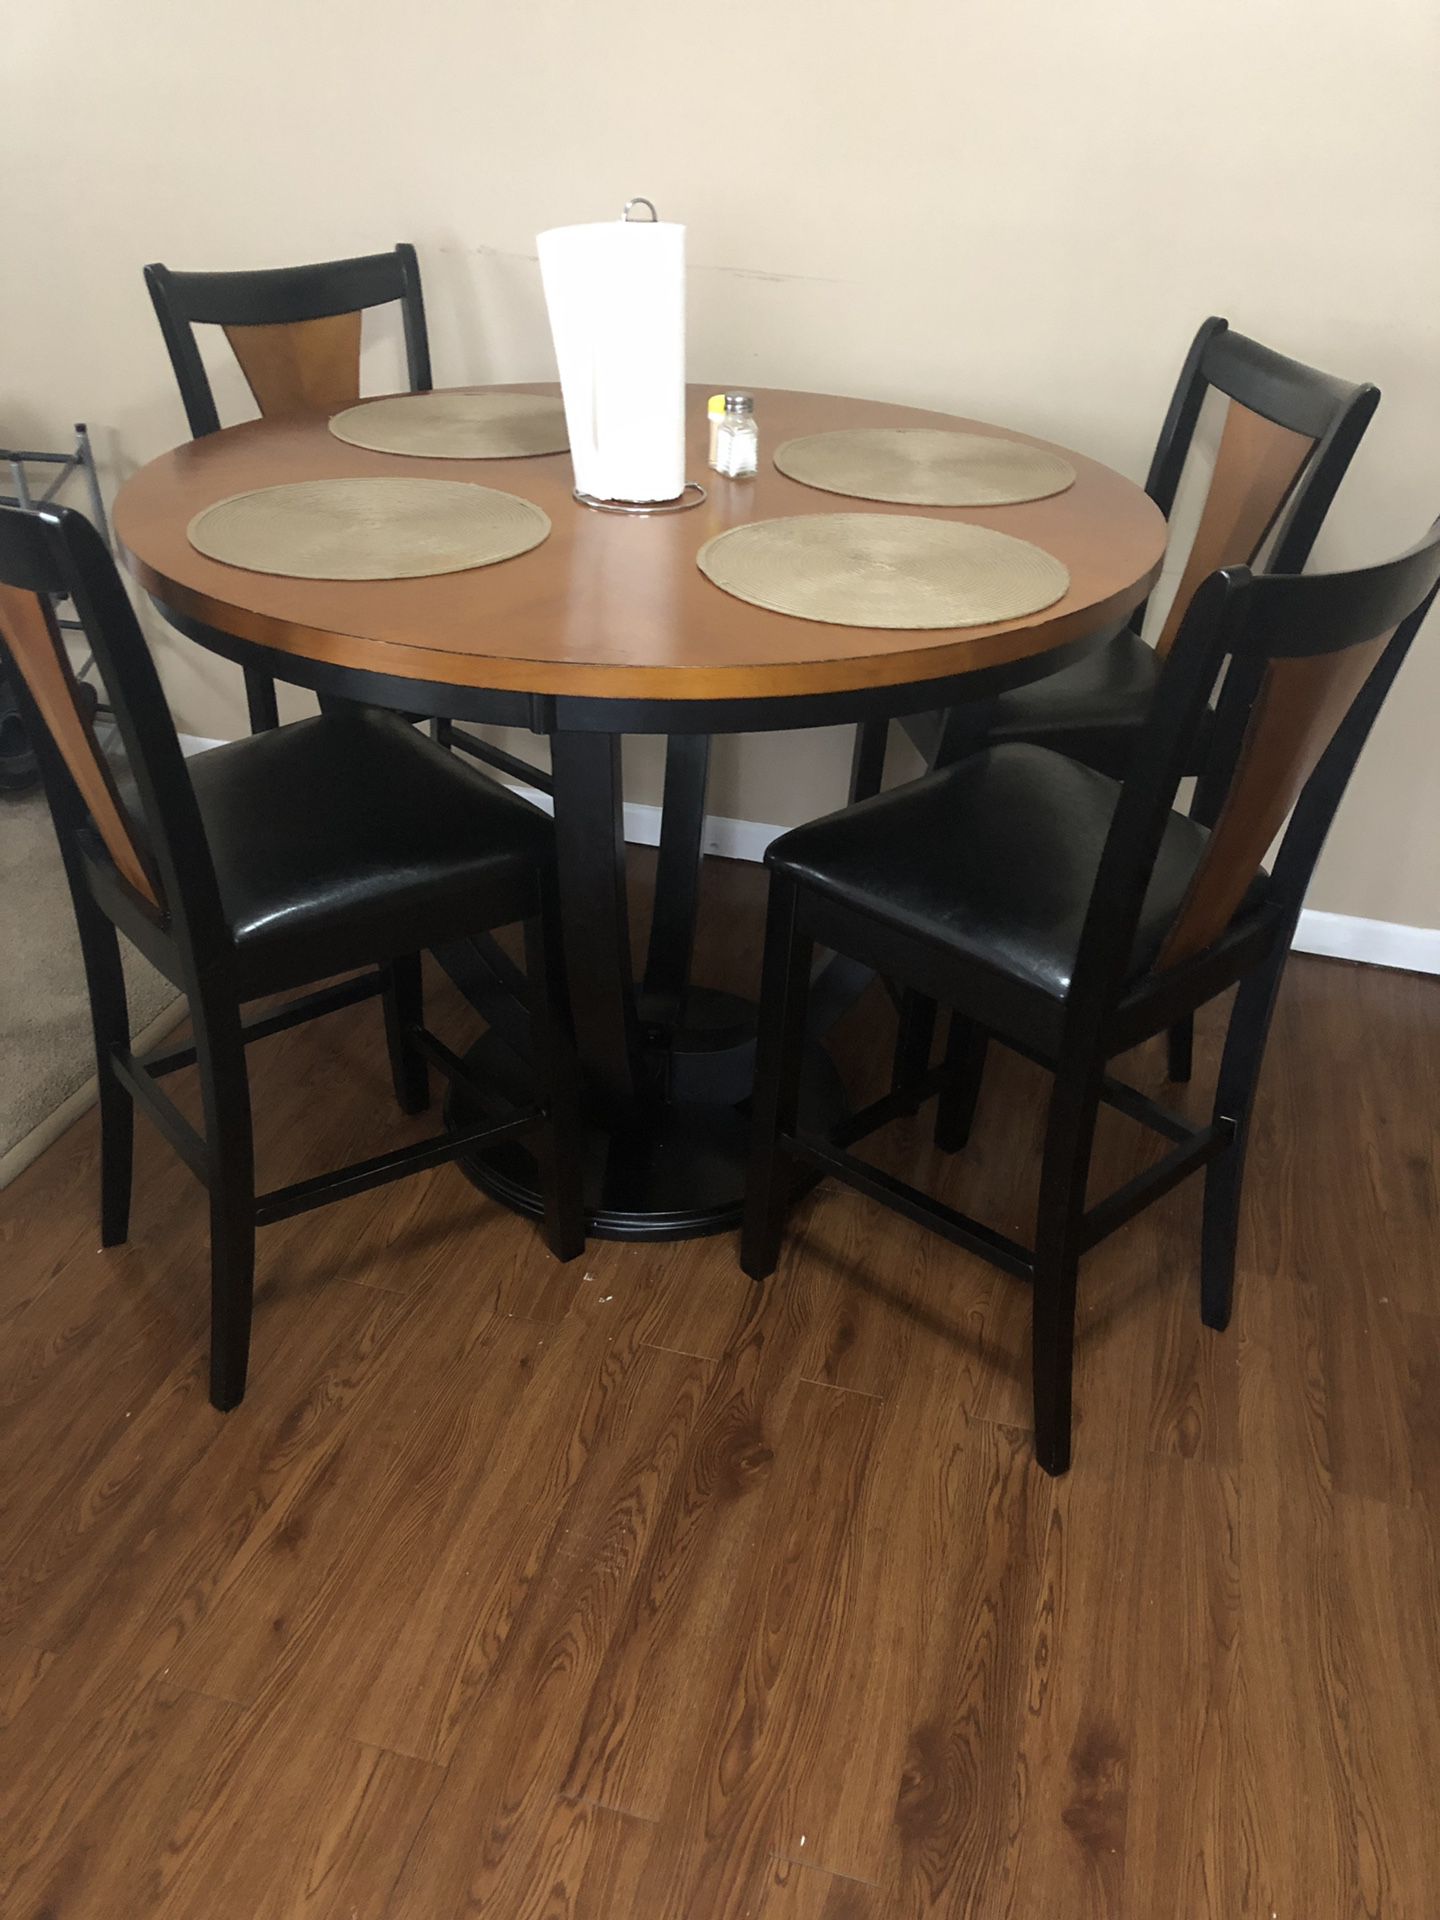 Kitchen table good condition